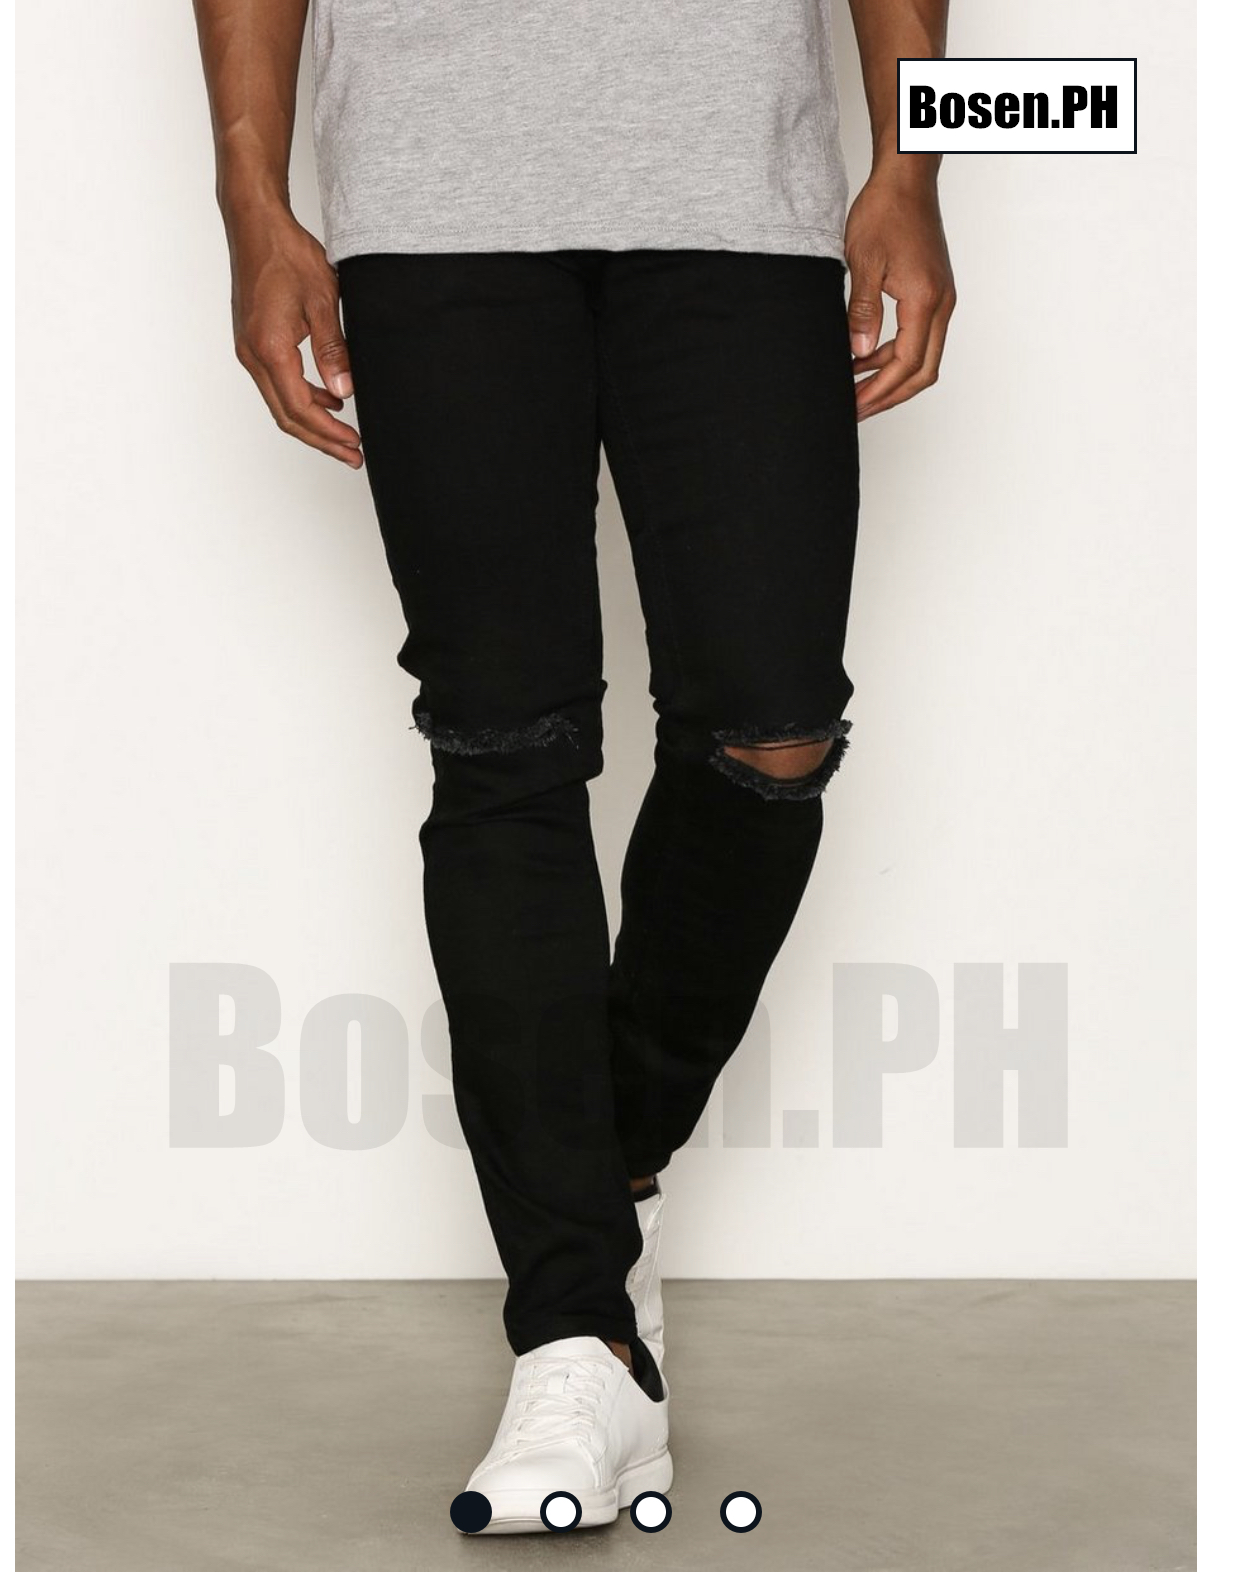 mens knee ripped black jeans